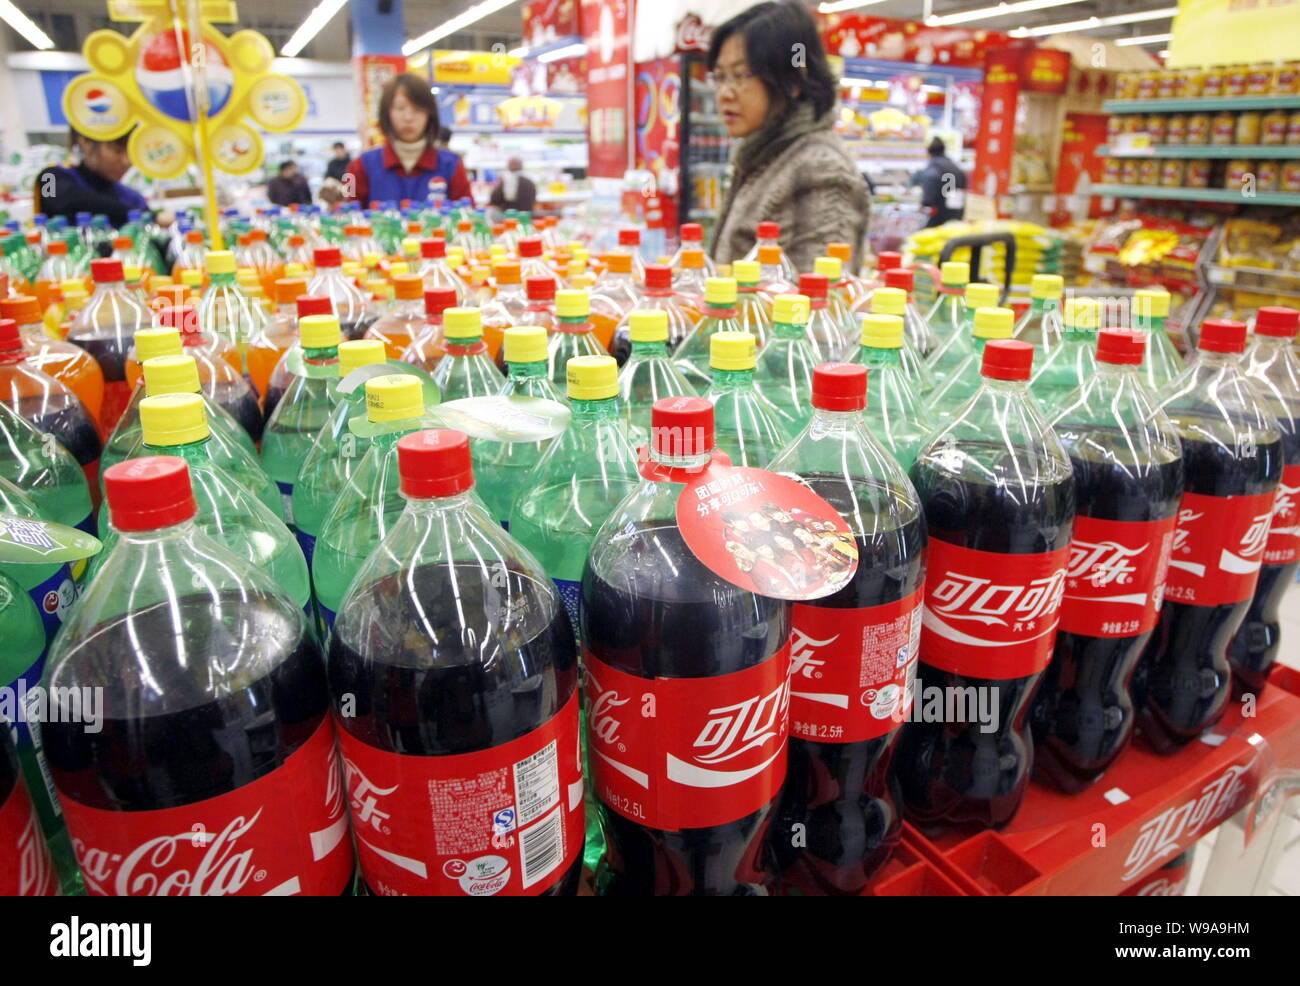 Bottles of Coca-Cola drinks are seen for sale at a supermarket in Shanghai, China, 2 February 2010.   Coca-Cola Co. reported stronger-than-expected qu Stock Photo